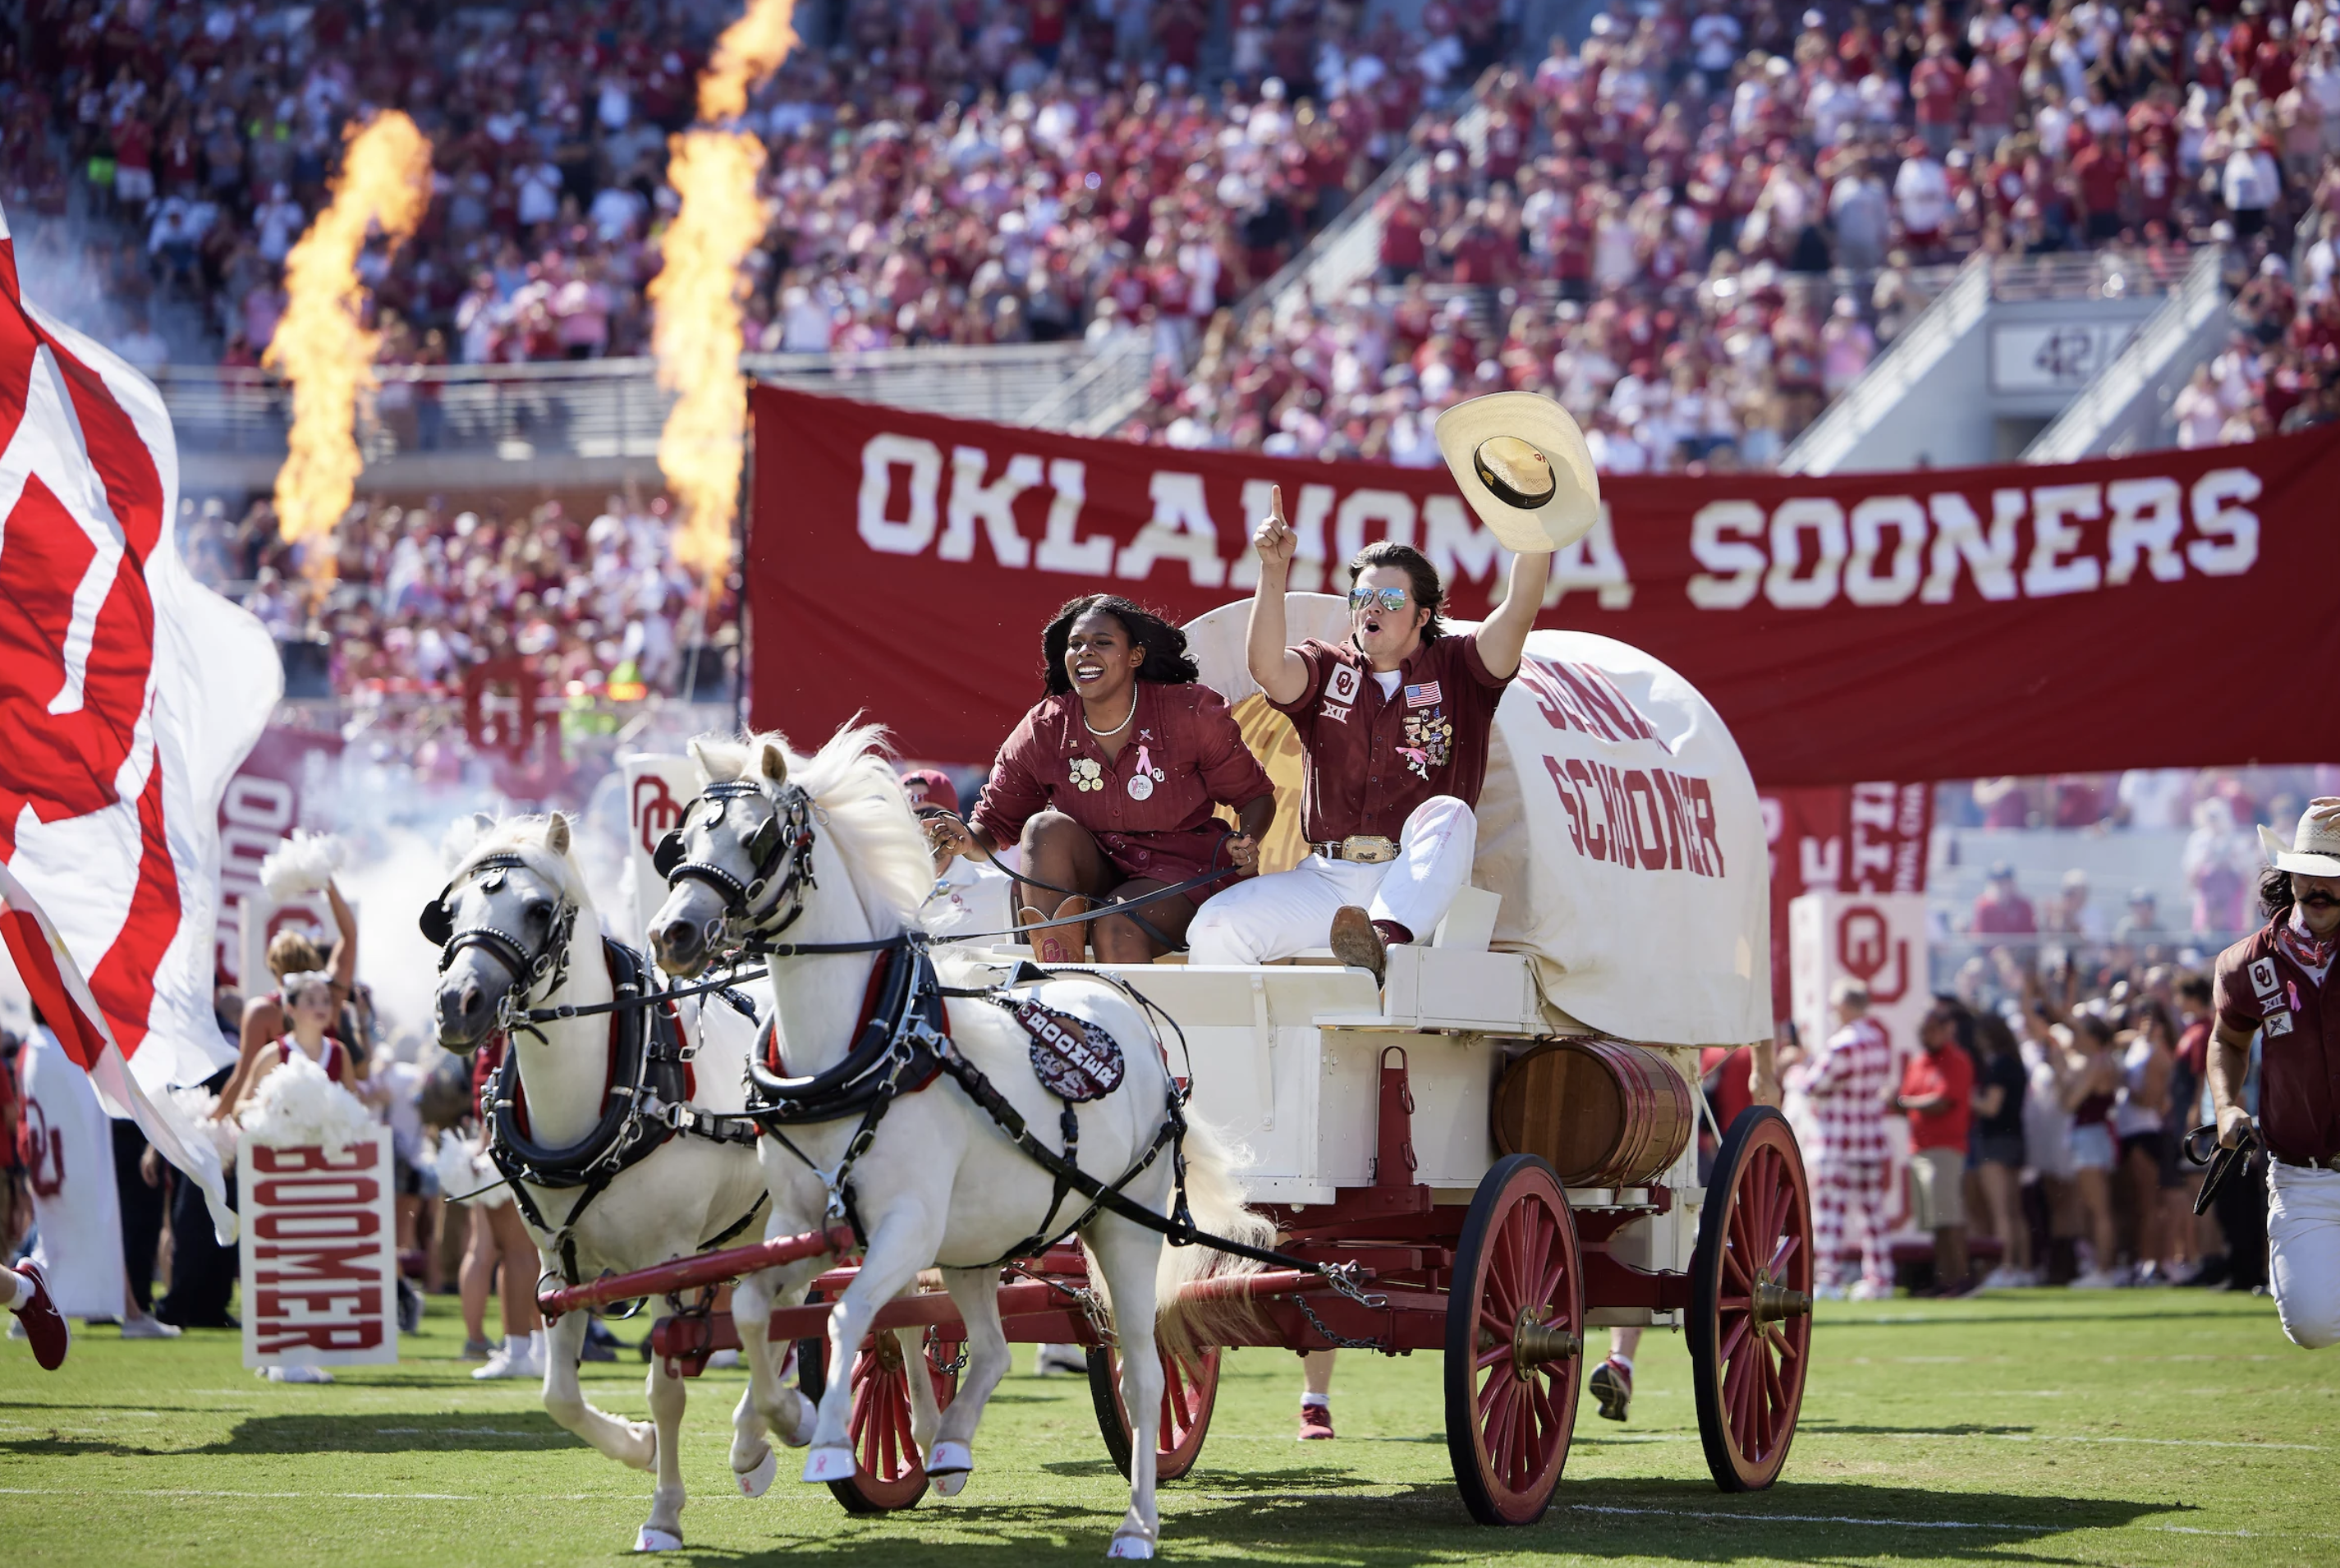 OU students riding the Schooner on the footbell field.